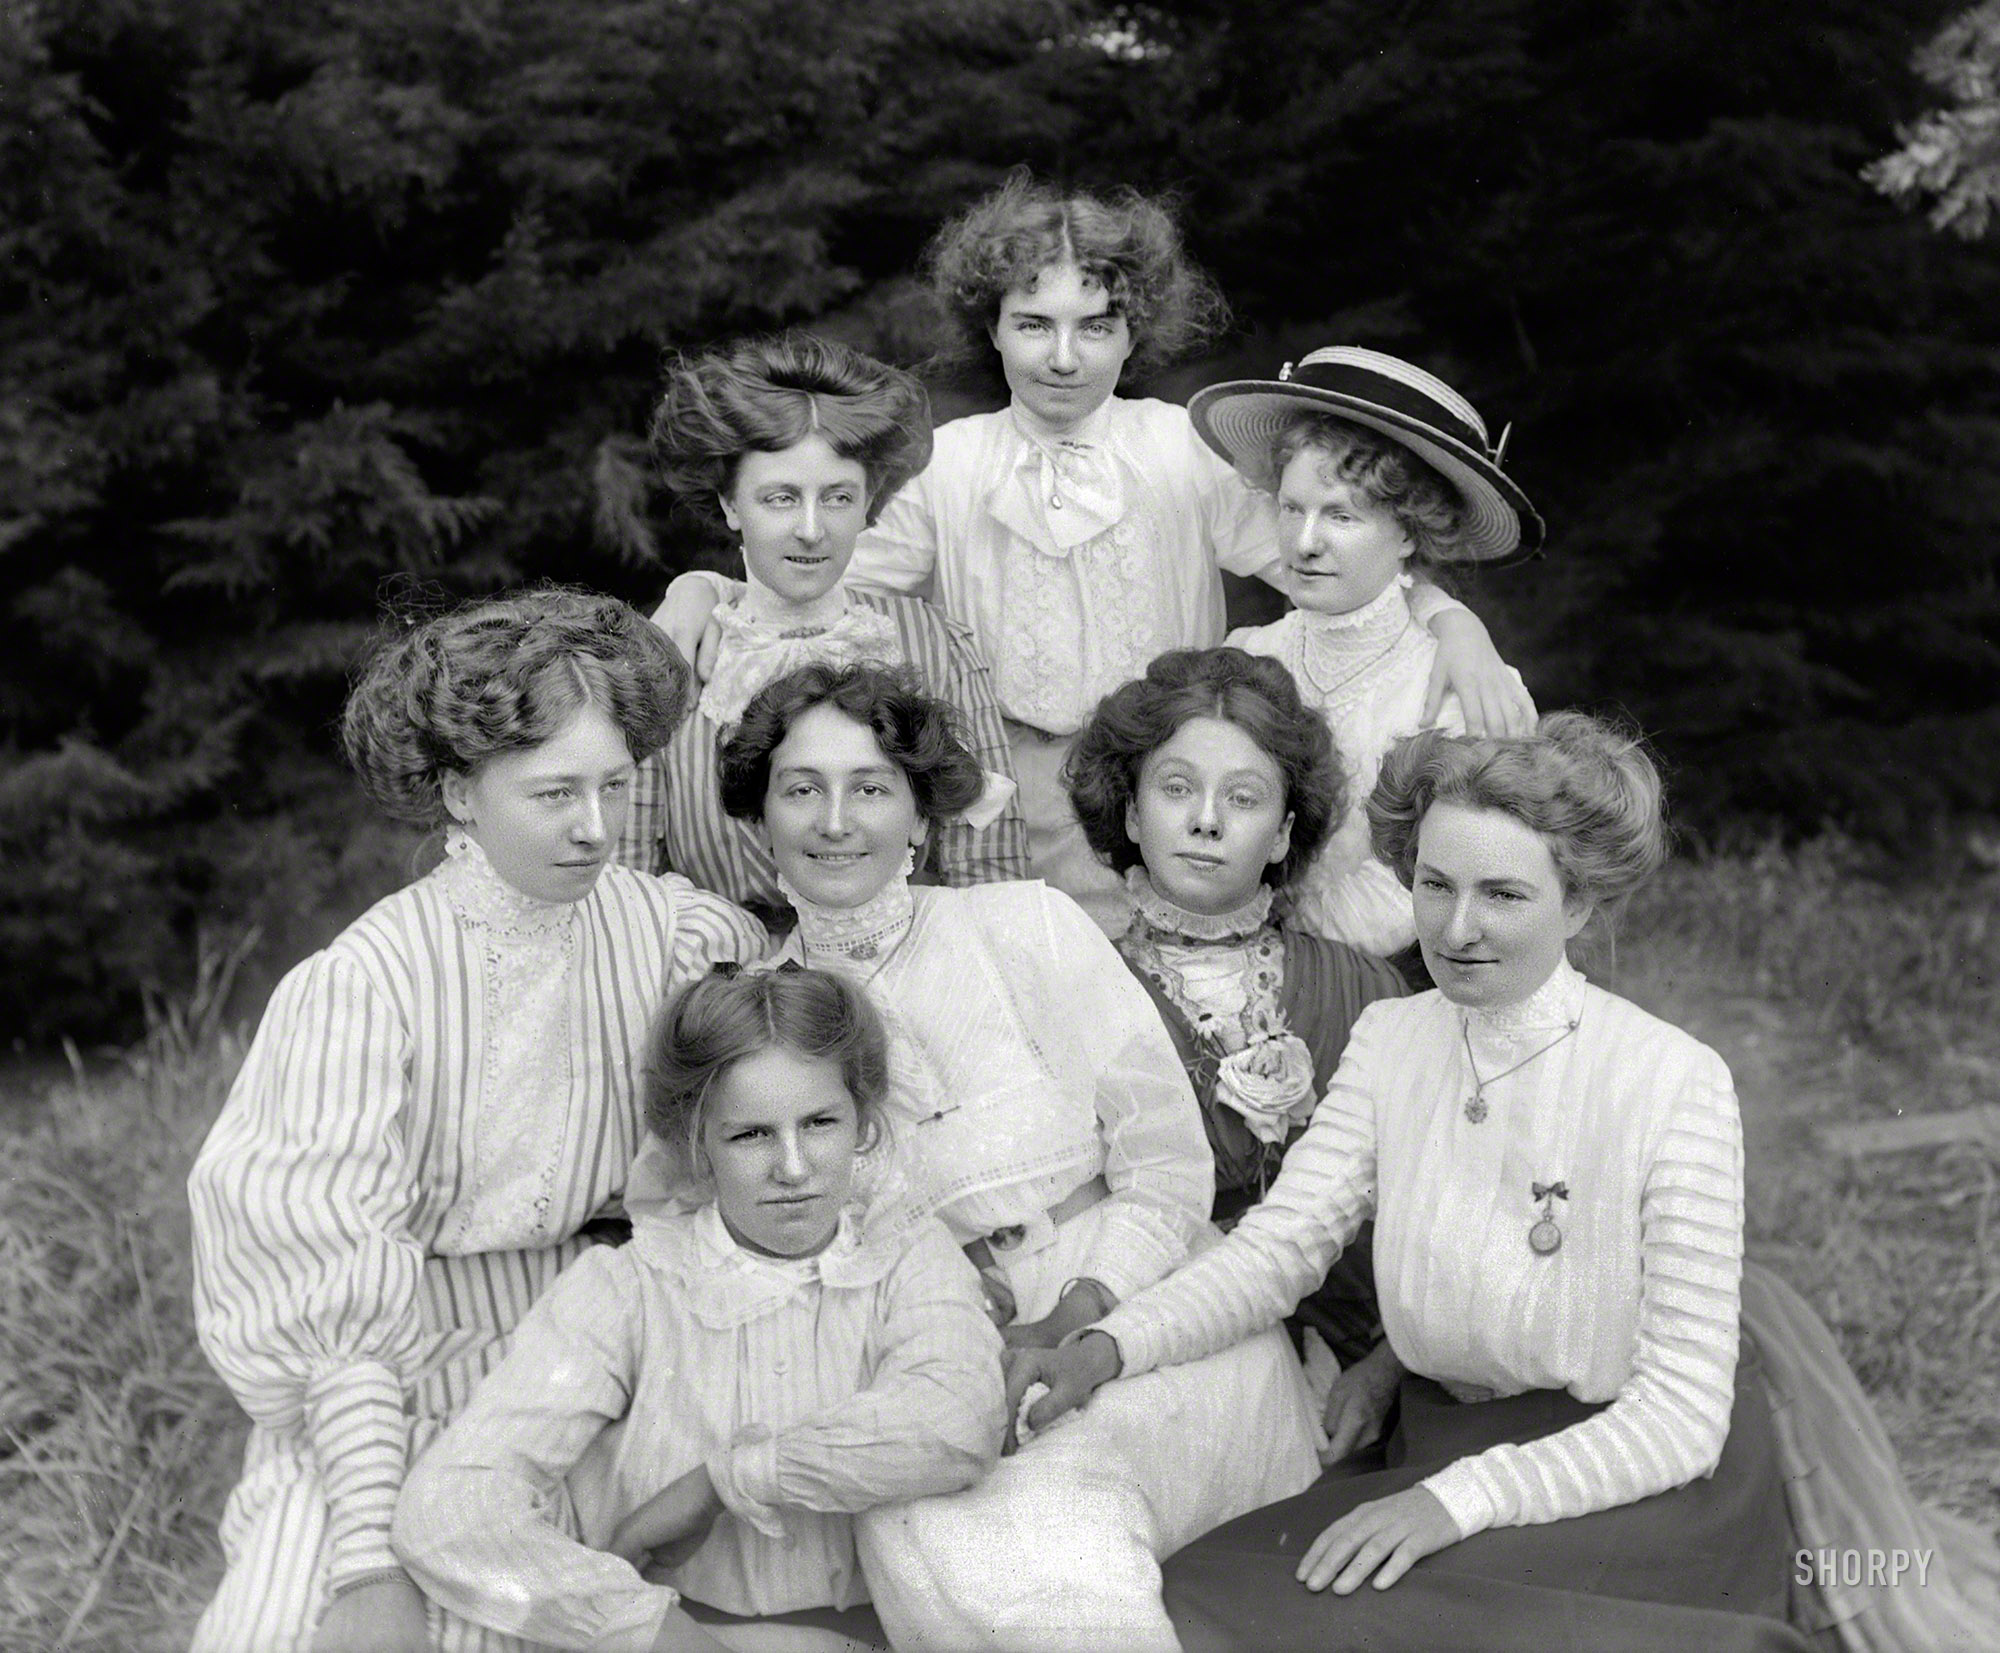 New Zealand circa 1905. "Group of unidentified young women outdoors, probably Christchurch district." An interesting variety of countenances and coifs. Glass negative by Adam Maclay, Alexander Turnbull Library. View full size.